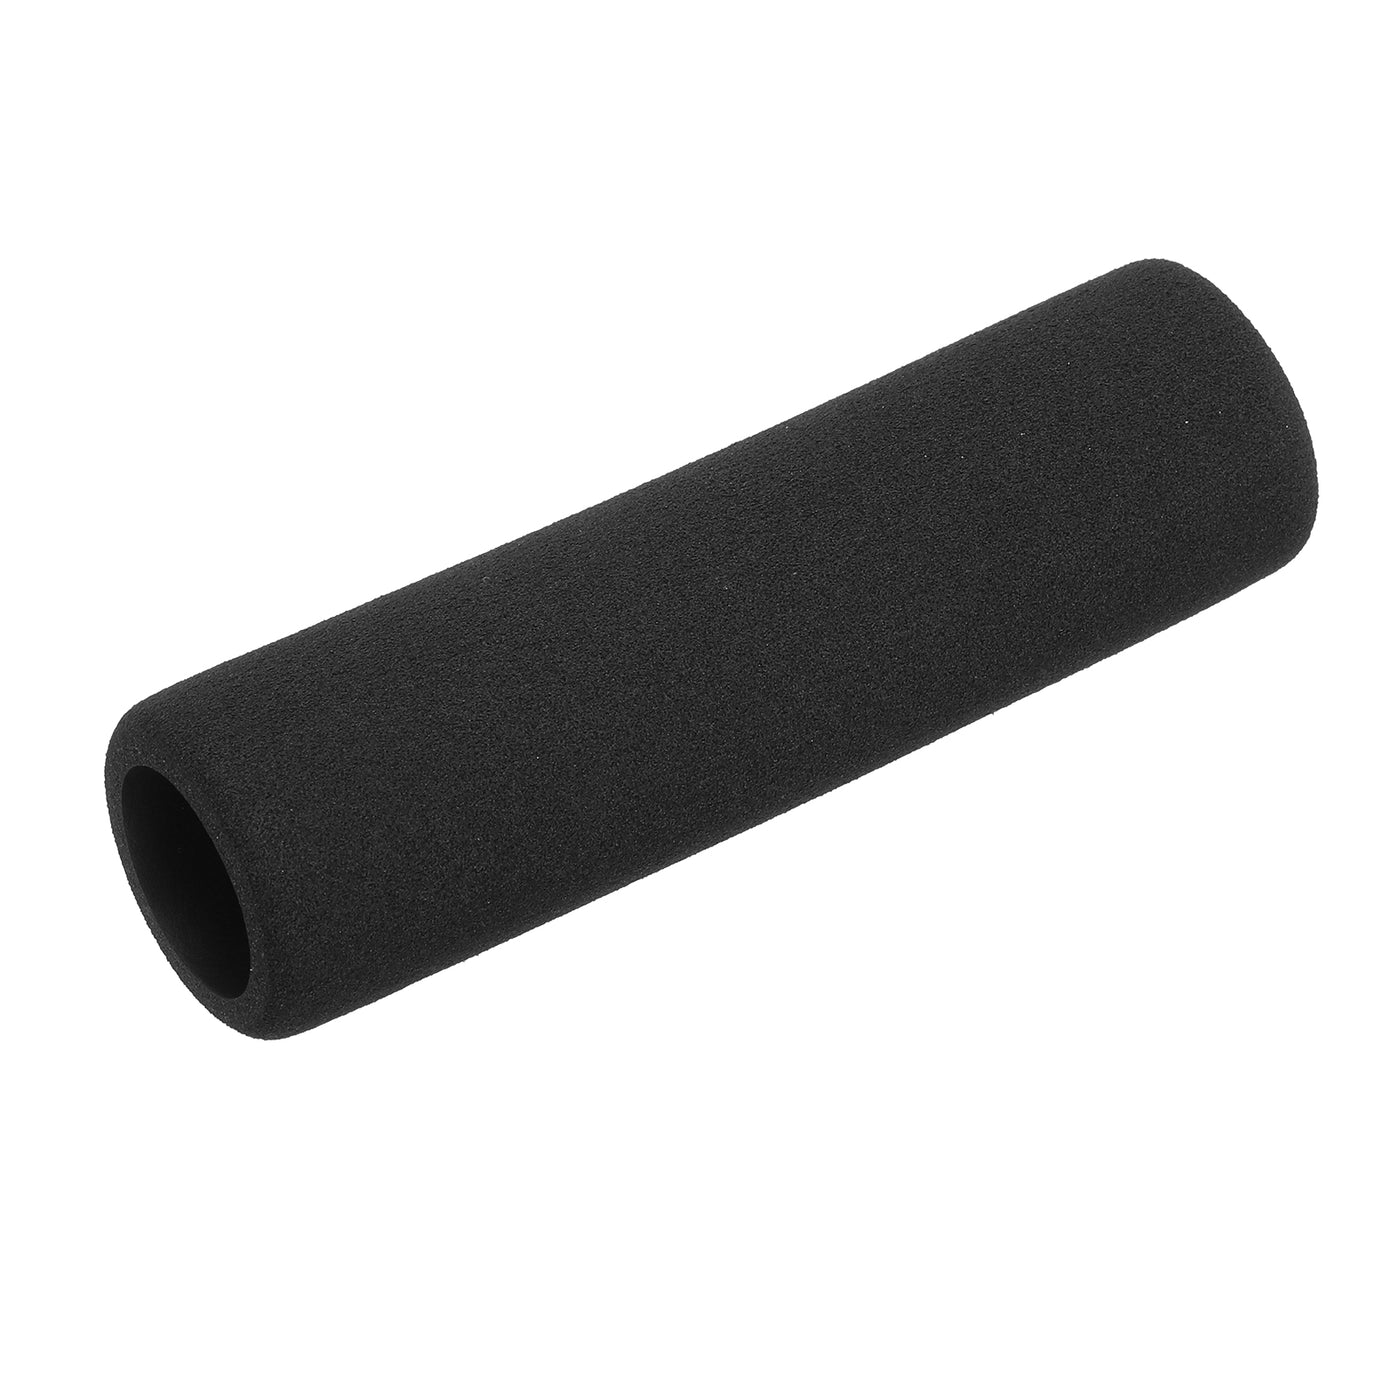 uxcell Uxcell Pipe Insulation Tube Foam Tubing for Handle Grip Support 21mm ID 31mm OD 118mm Heat Preservation Black